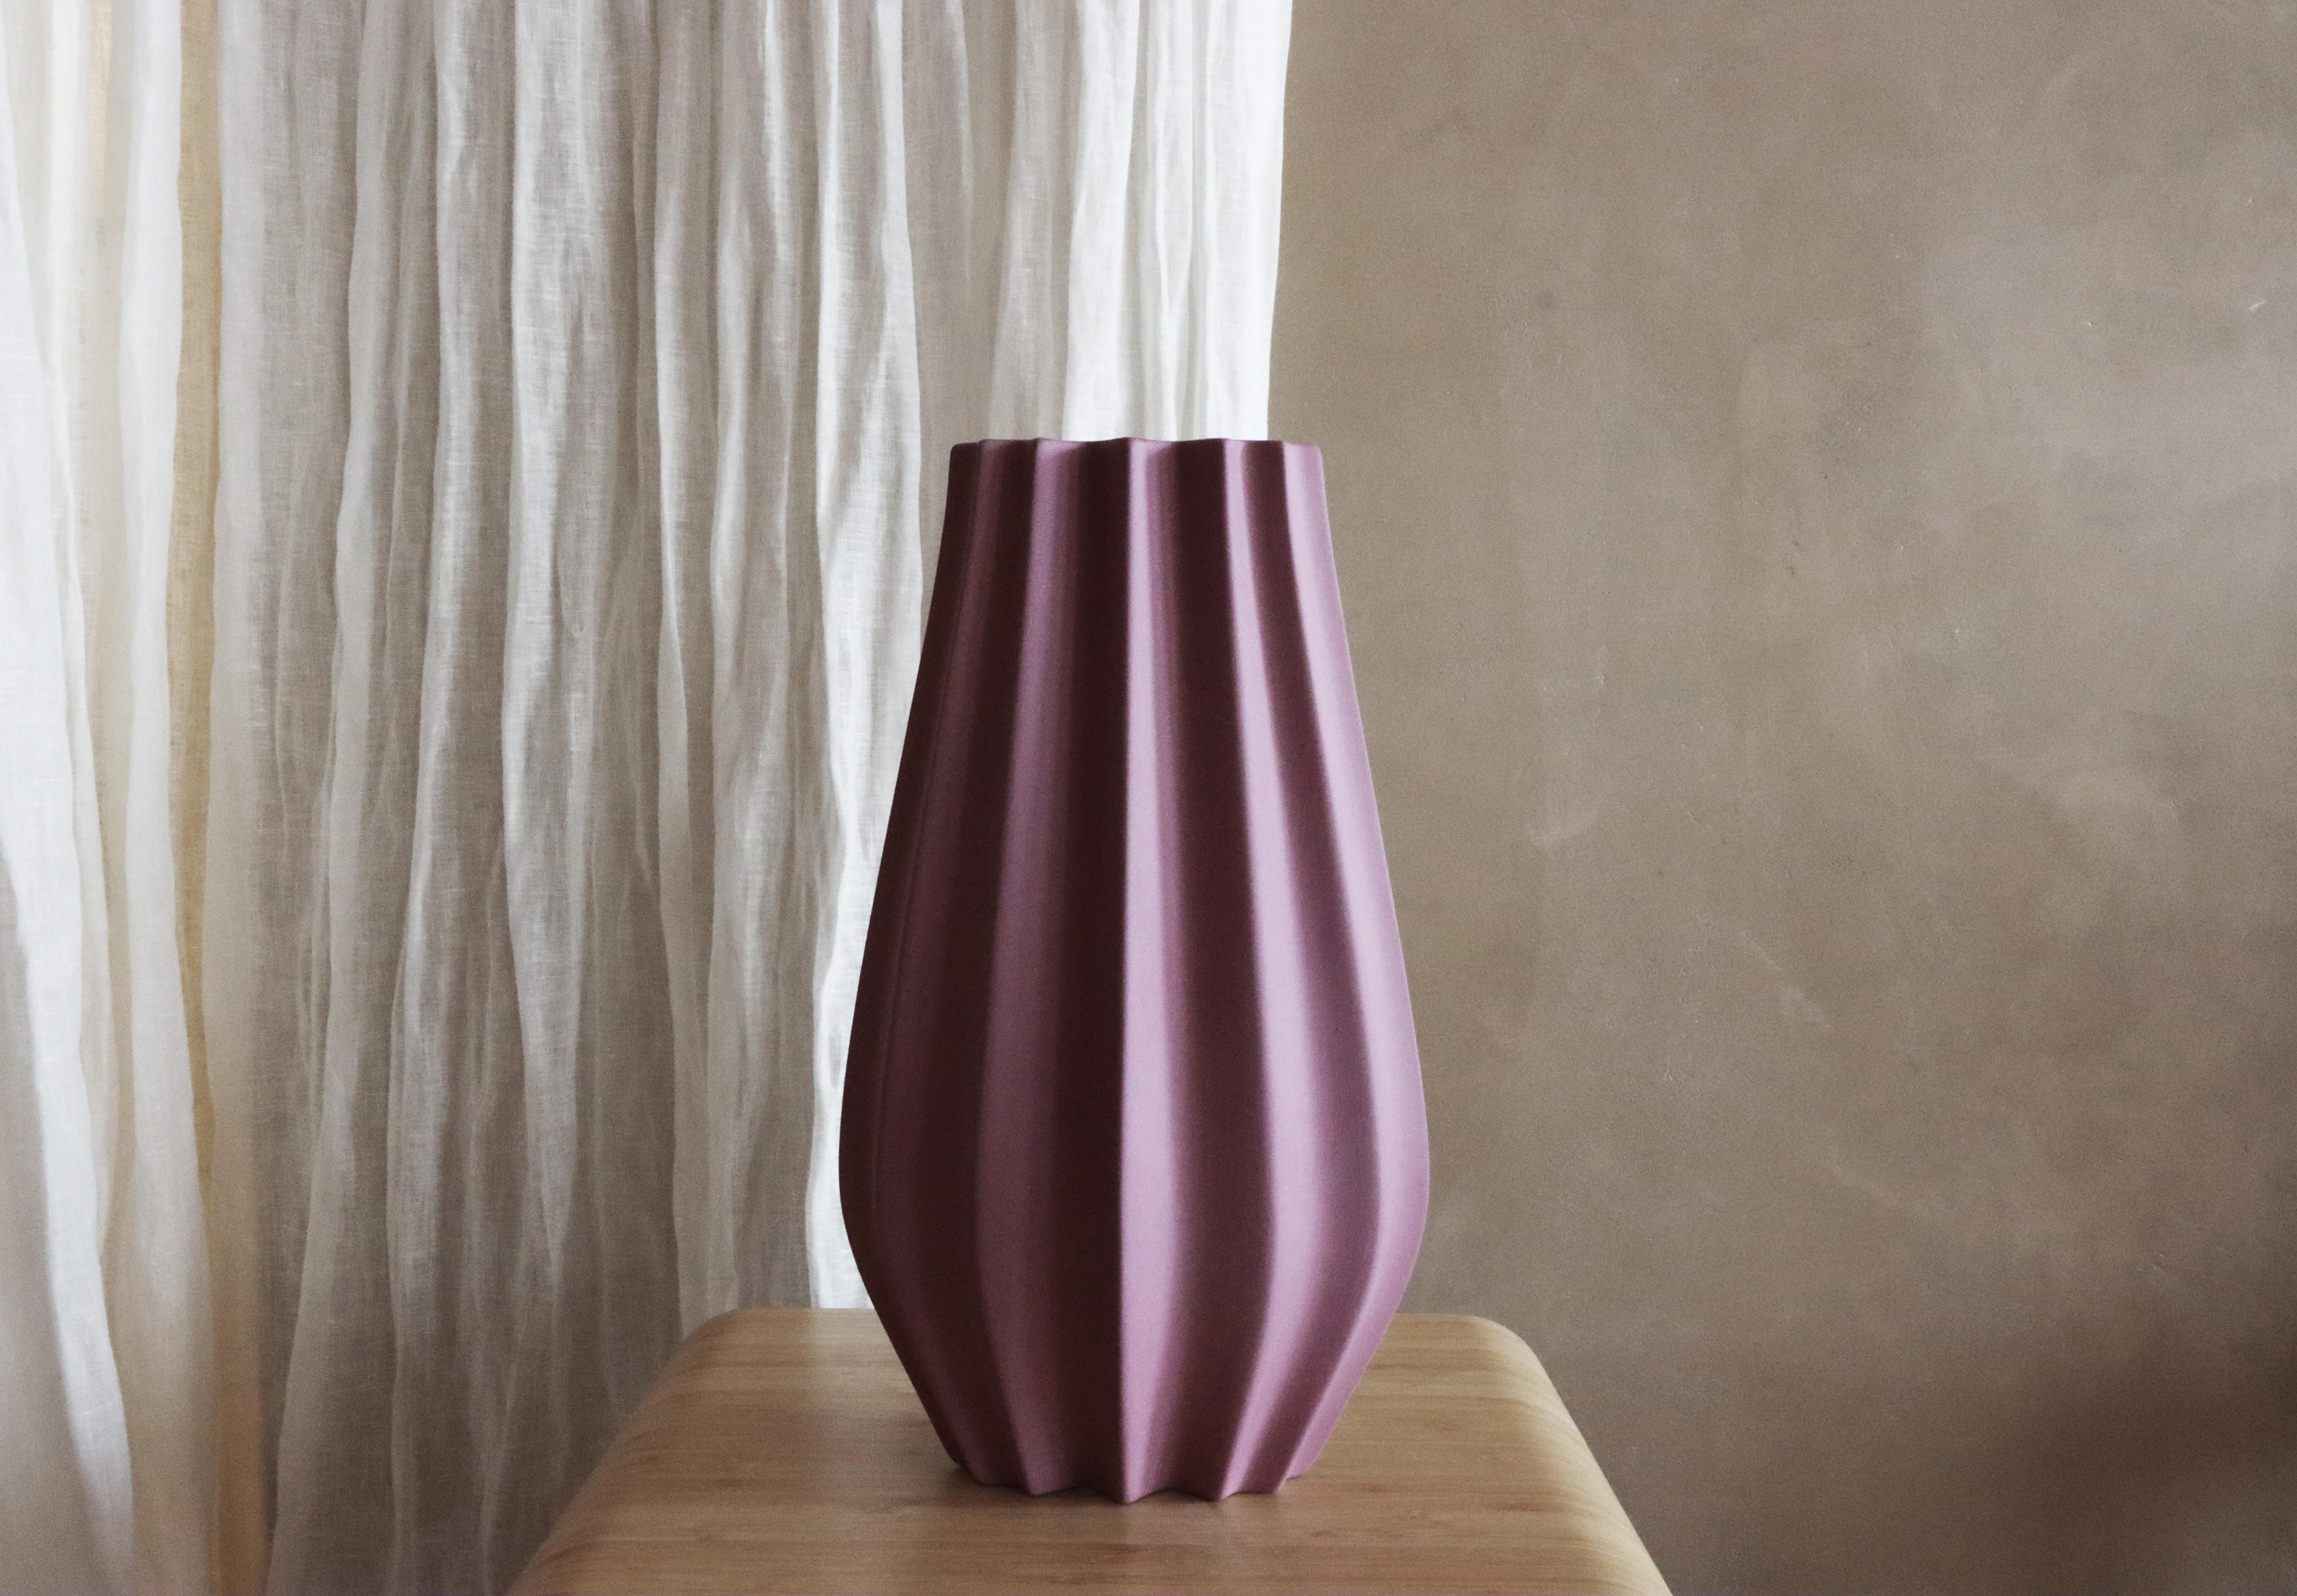 We are excited to introduce the latest addition to the Object Van Brandenburg family - the Fluted Vase. 
The Fluted Vase is a testament to both elegance and craftsmanship. Its unique design, characterized by delicate fluted lines, sets it apart as a